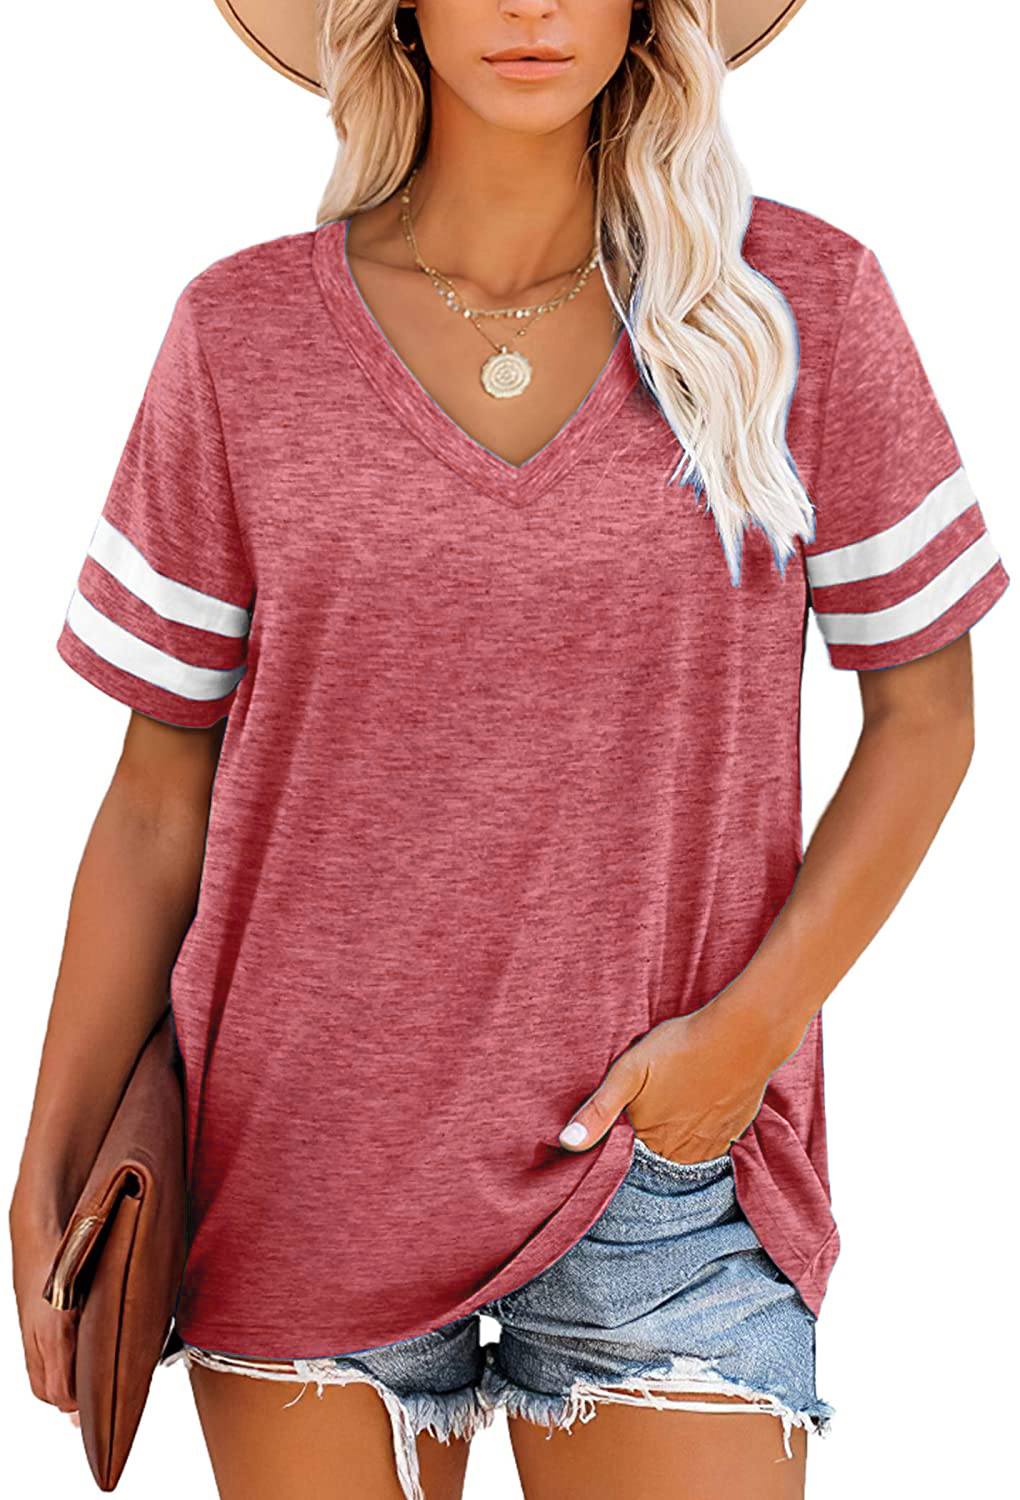 Ichuanyi Trendy Striped T Shirt for Women Summer Graphic Tee Tops ...